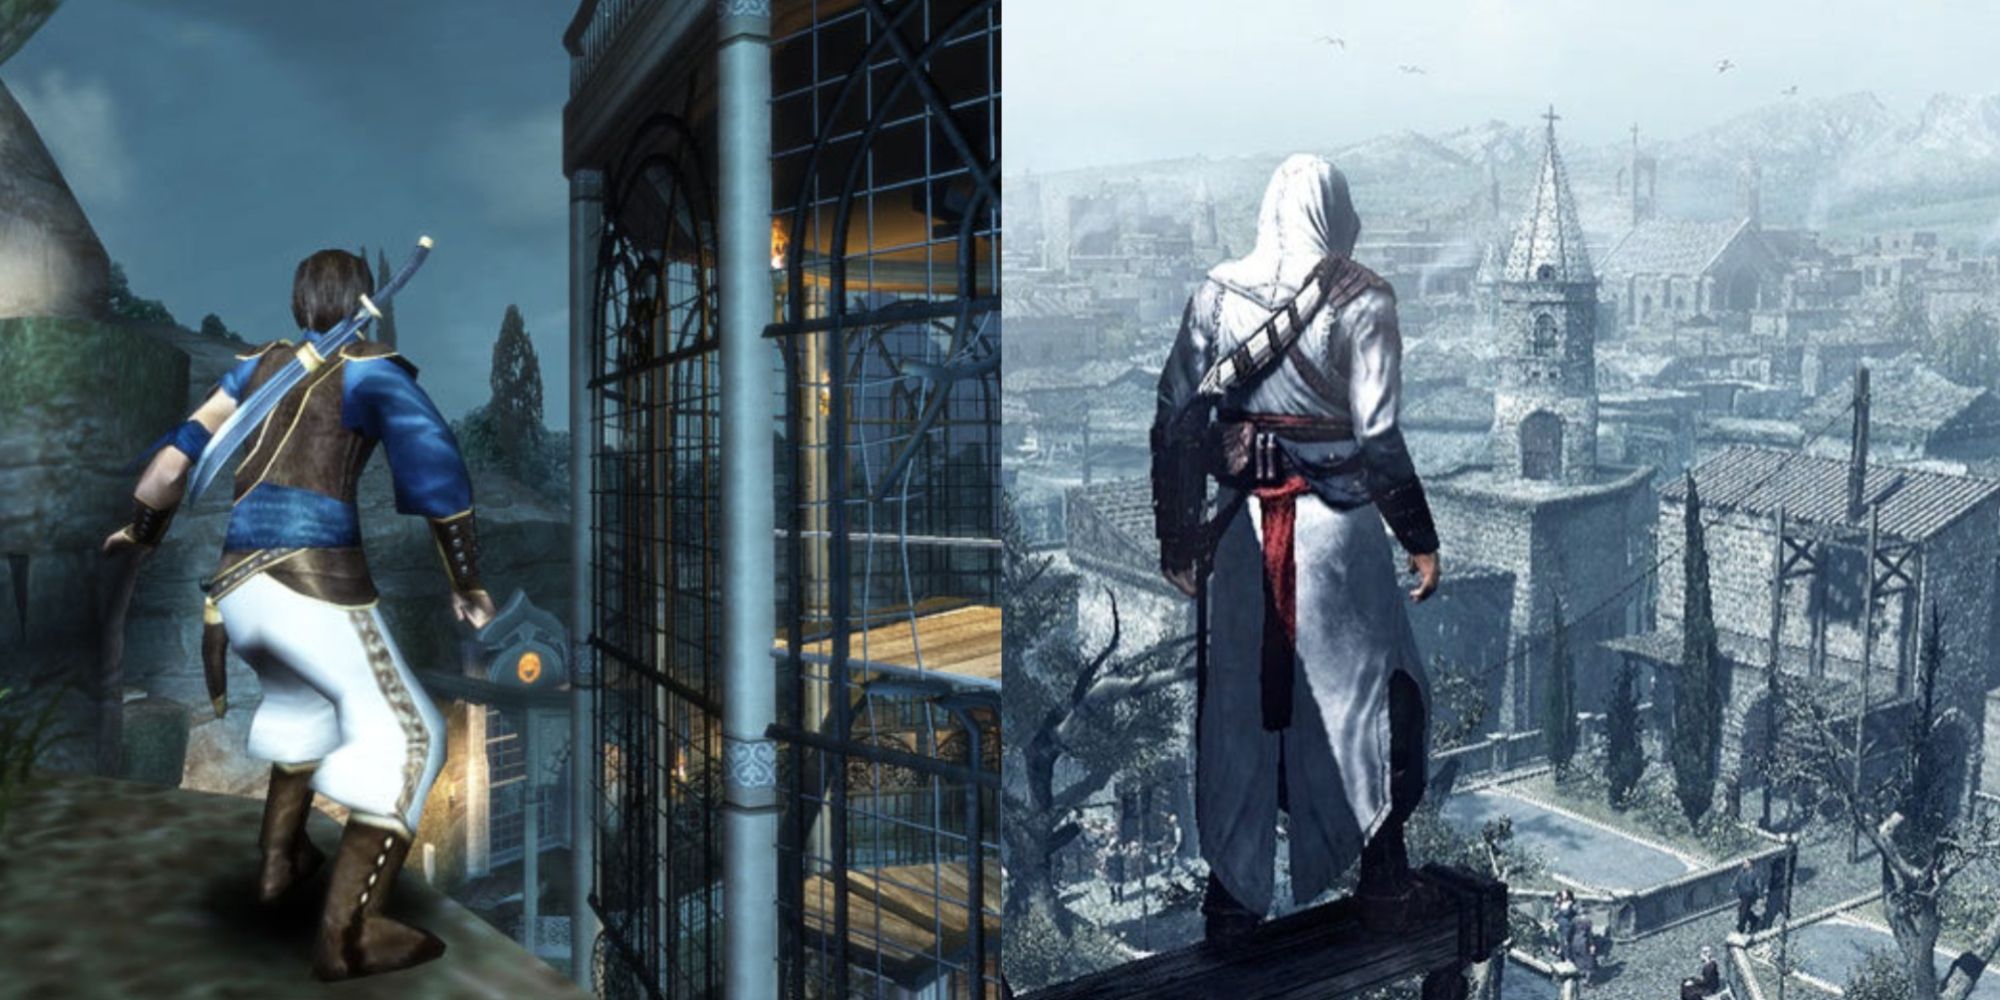 Did Prince Of Persia Inspire Assassin's Creed Featured Split Image Sands Of Time screenshot and Assassin's Creed 2007 screenshot